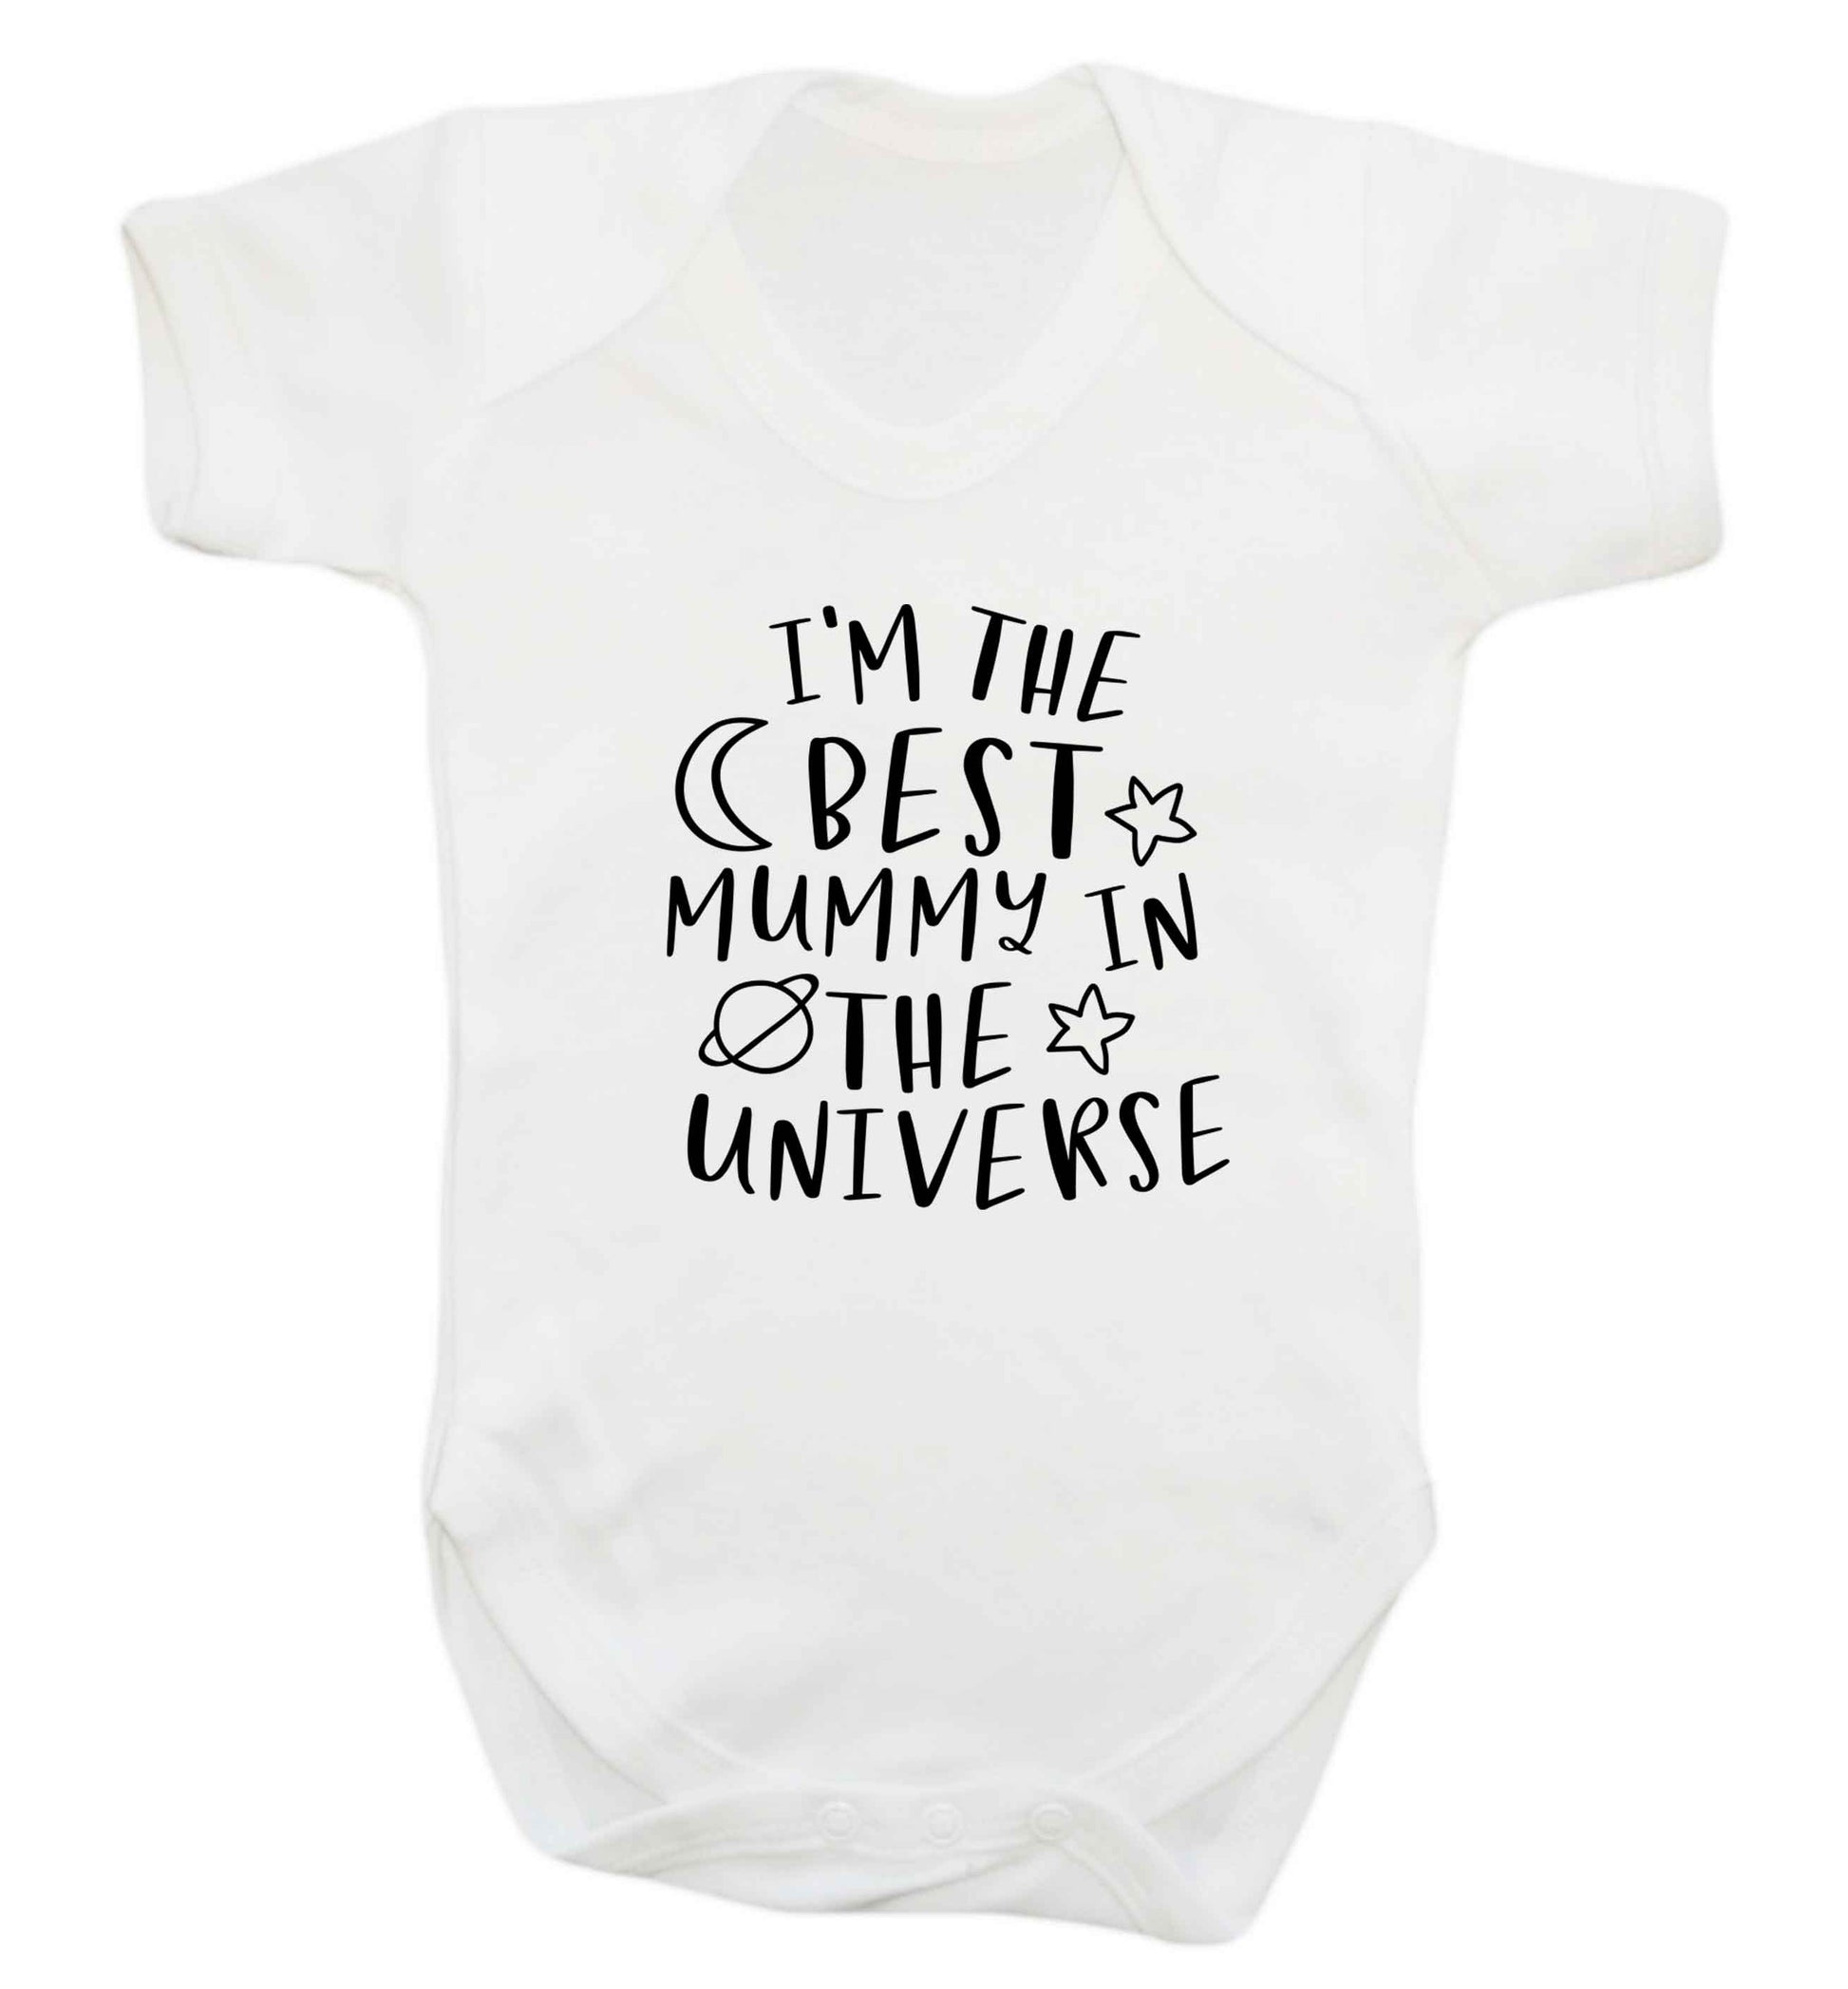 I'm the best mummy in the universe baby vest white 18-24 months